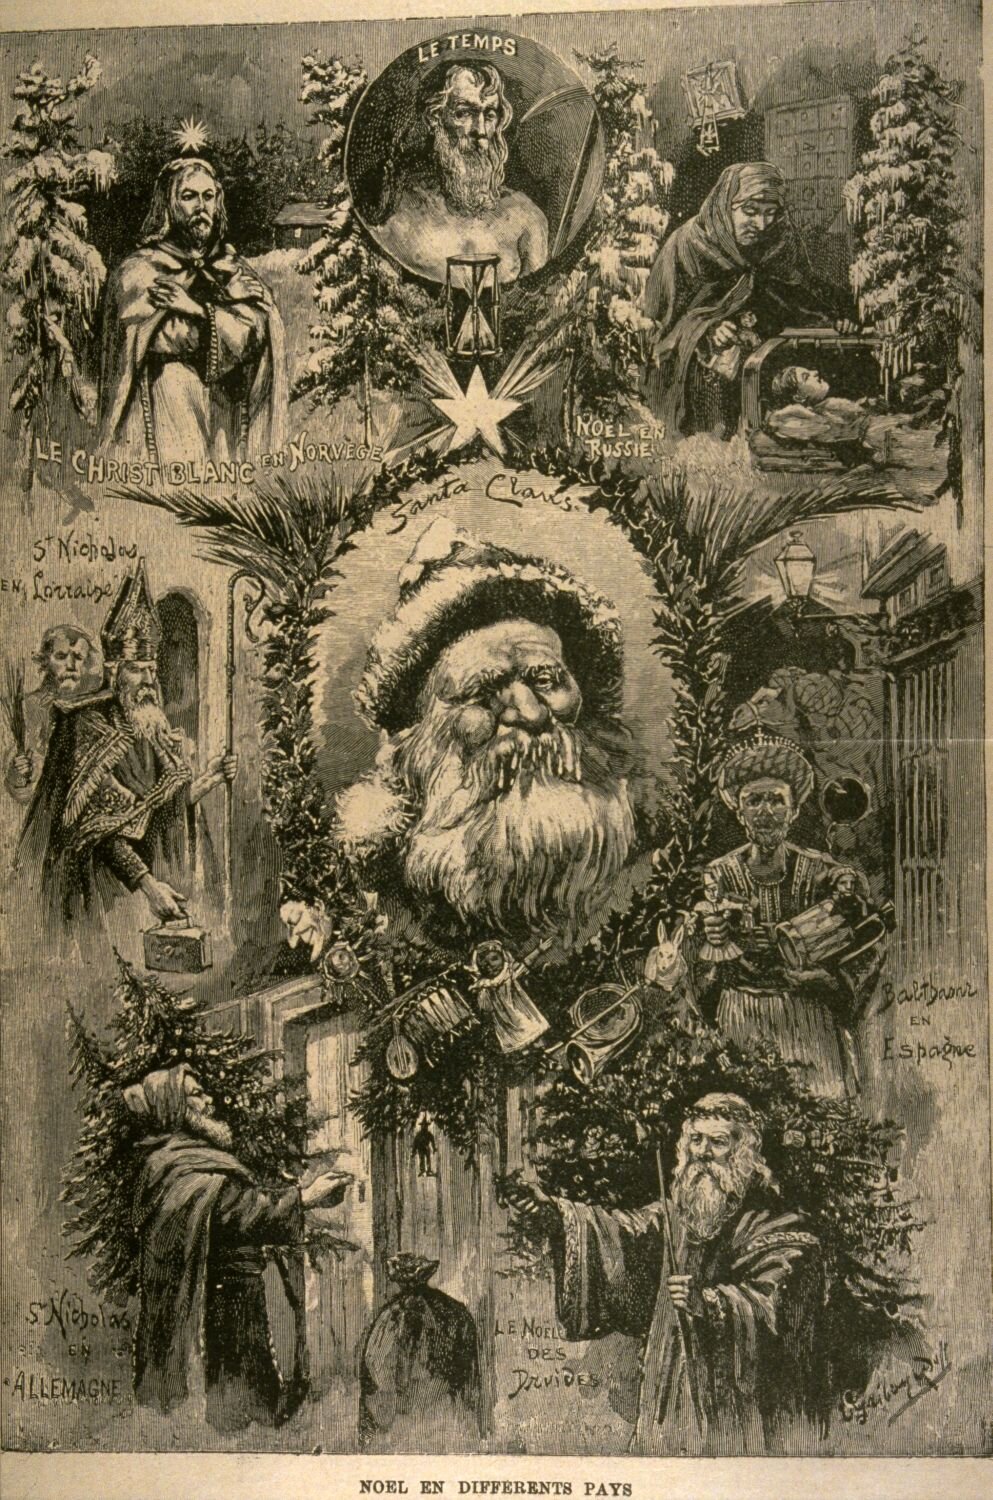 1894 drawing of "Christmas in Different Countries" (BAnQ)